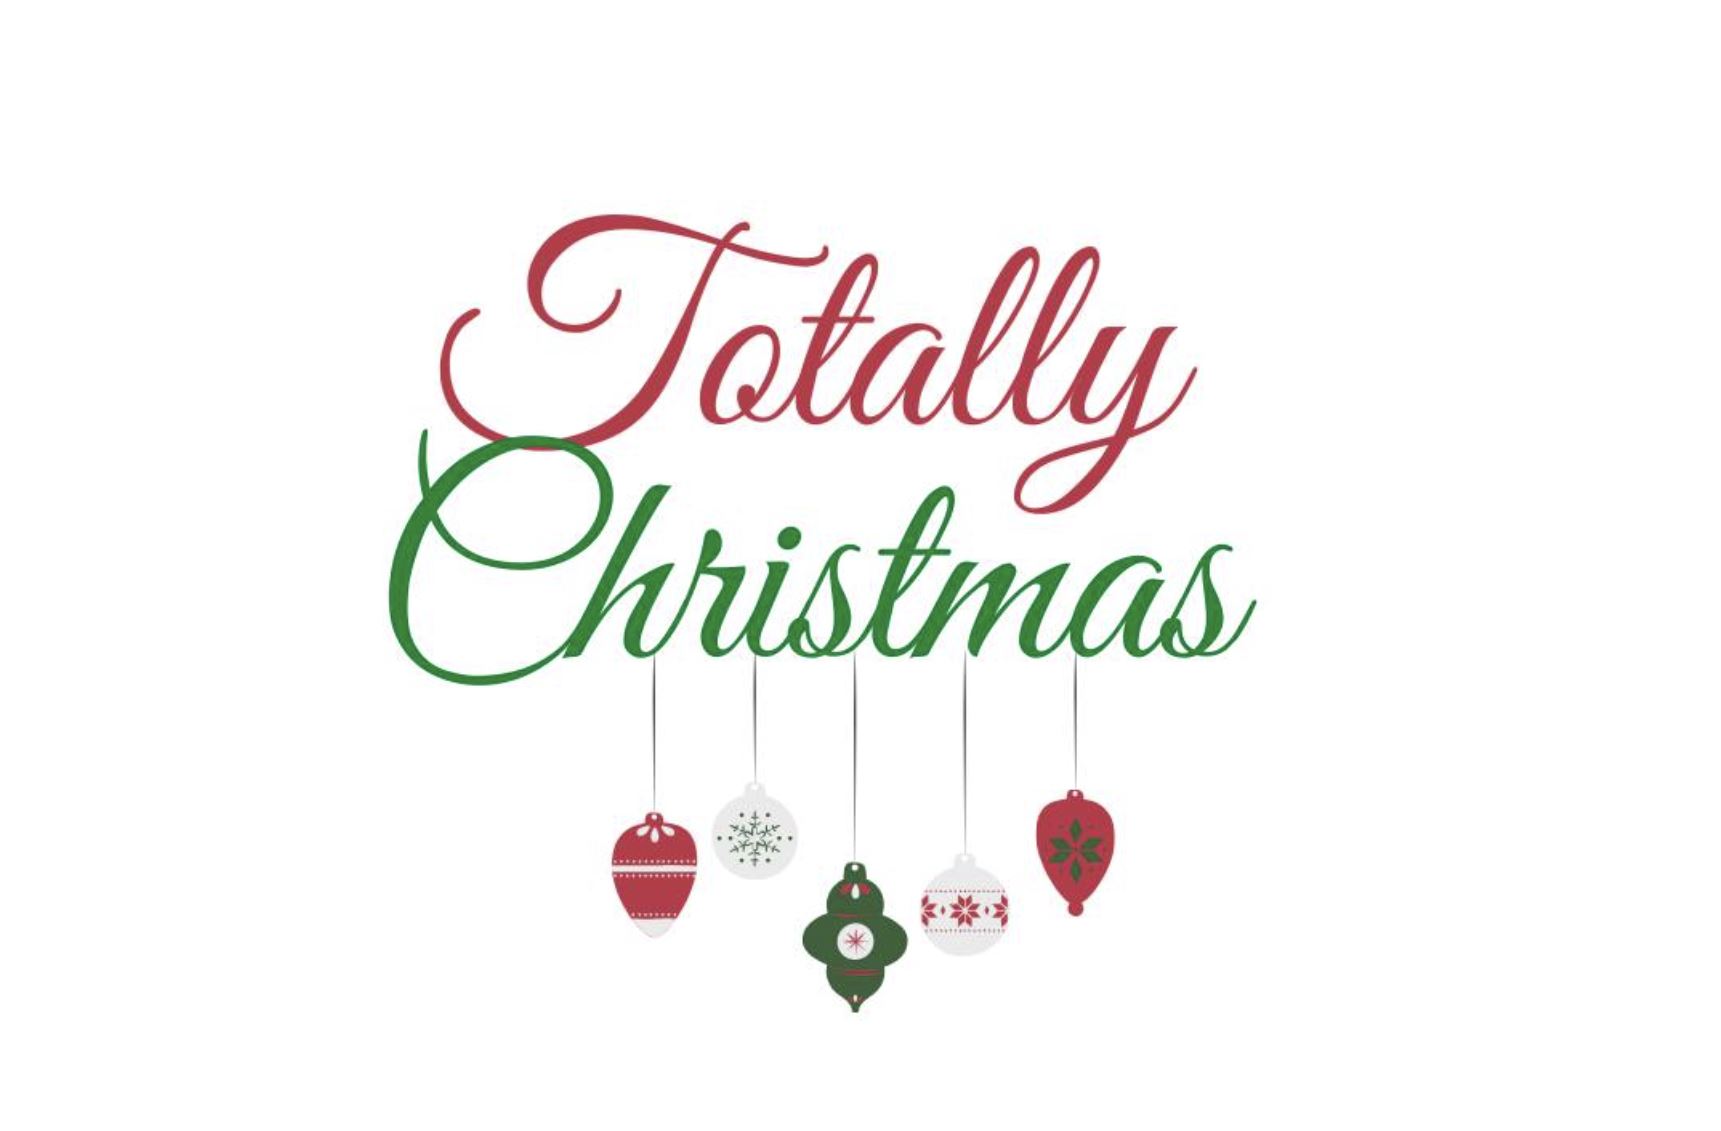 Trussville Civic Center announces it's Totally Christmas event